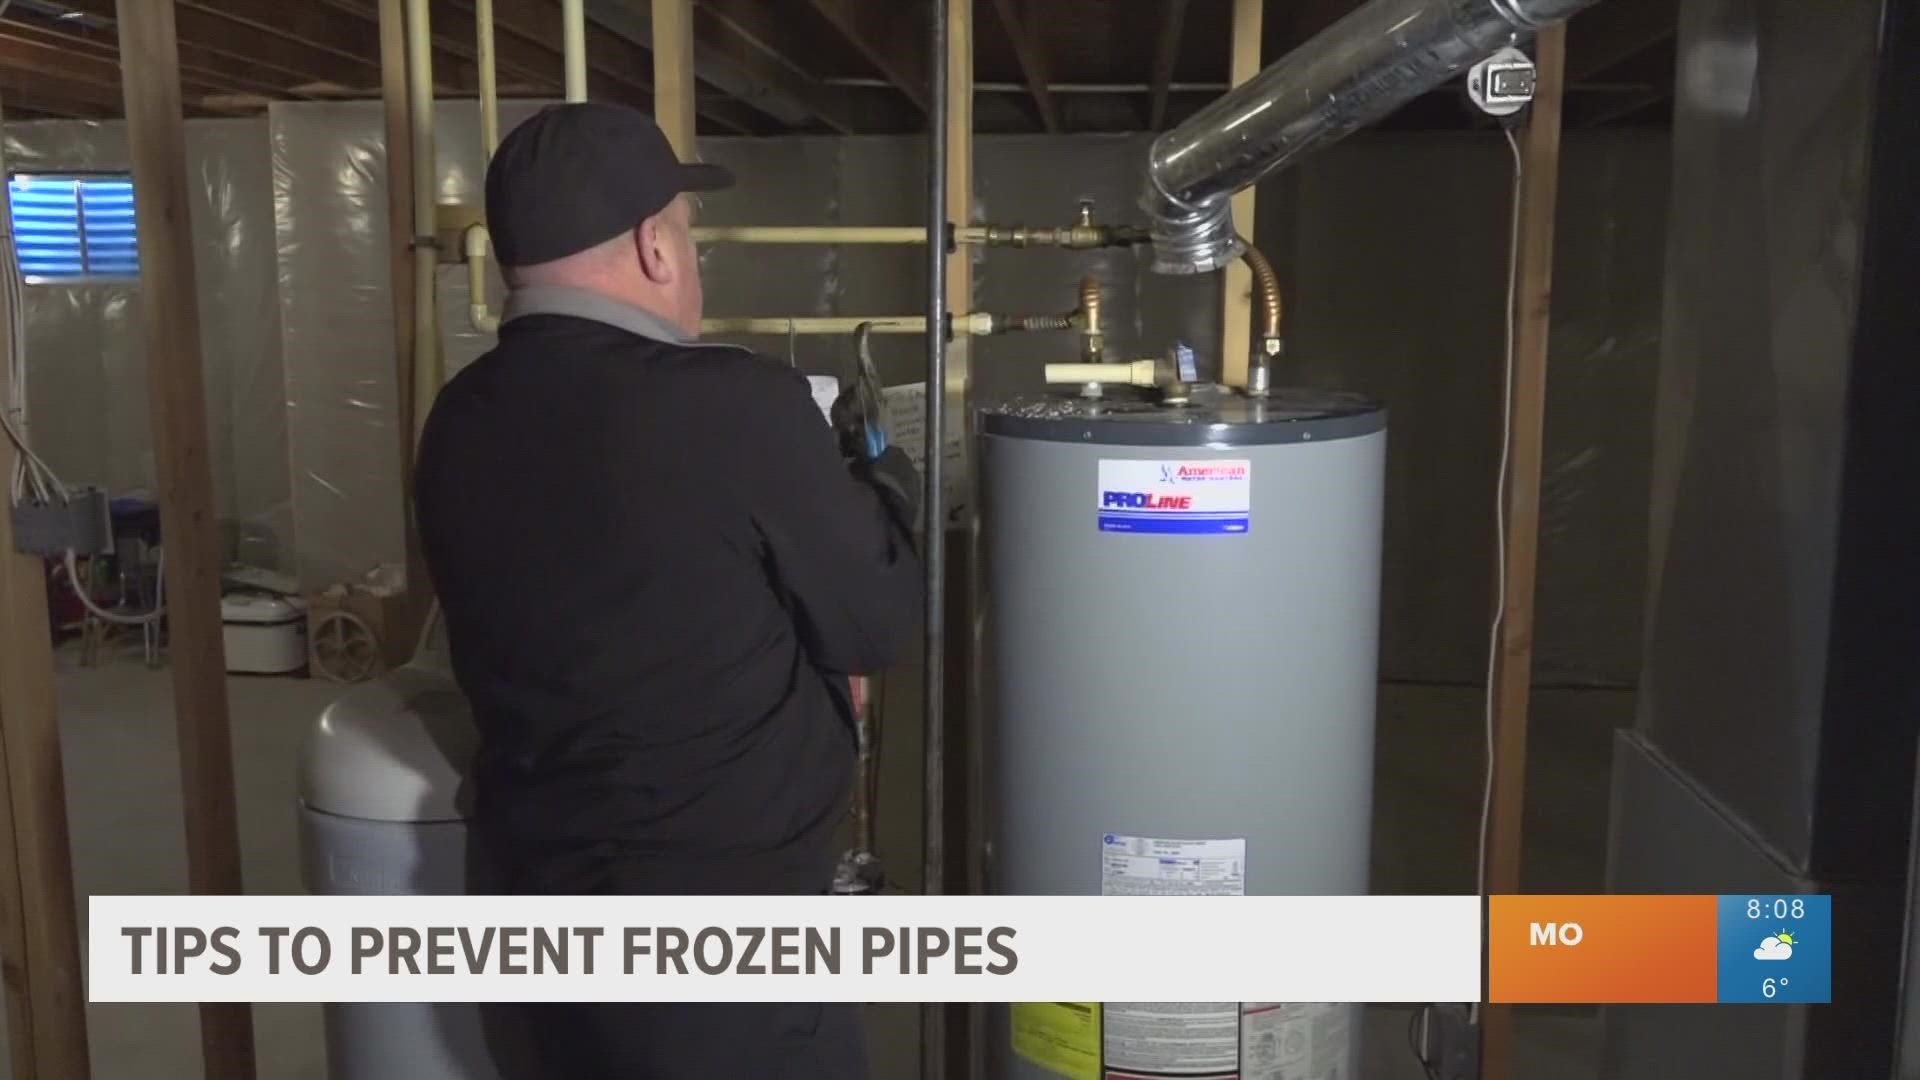 Tips to prevent frozen pipes during cold weather